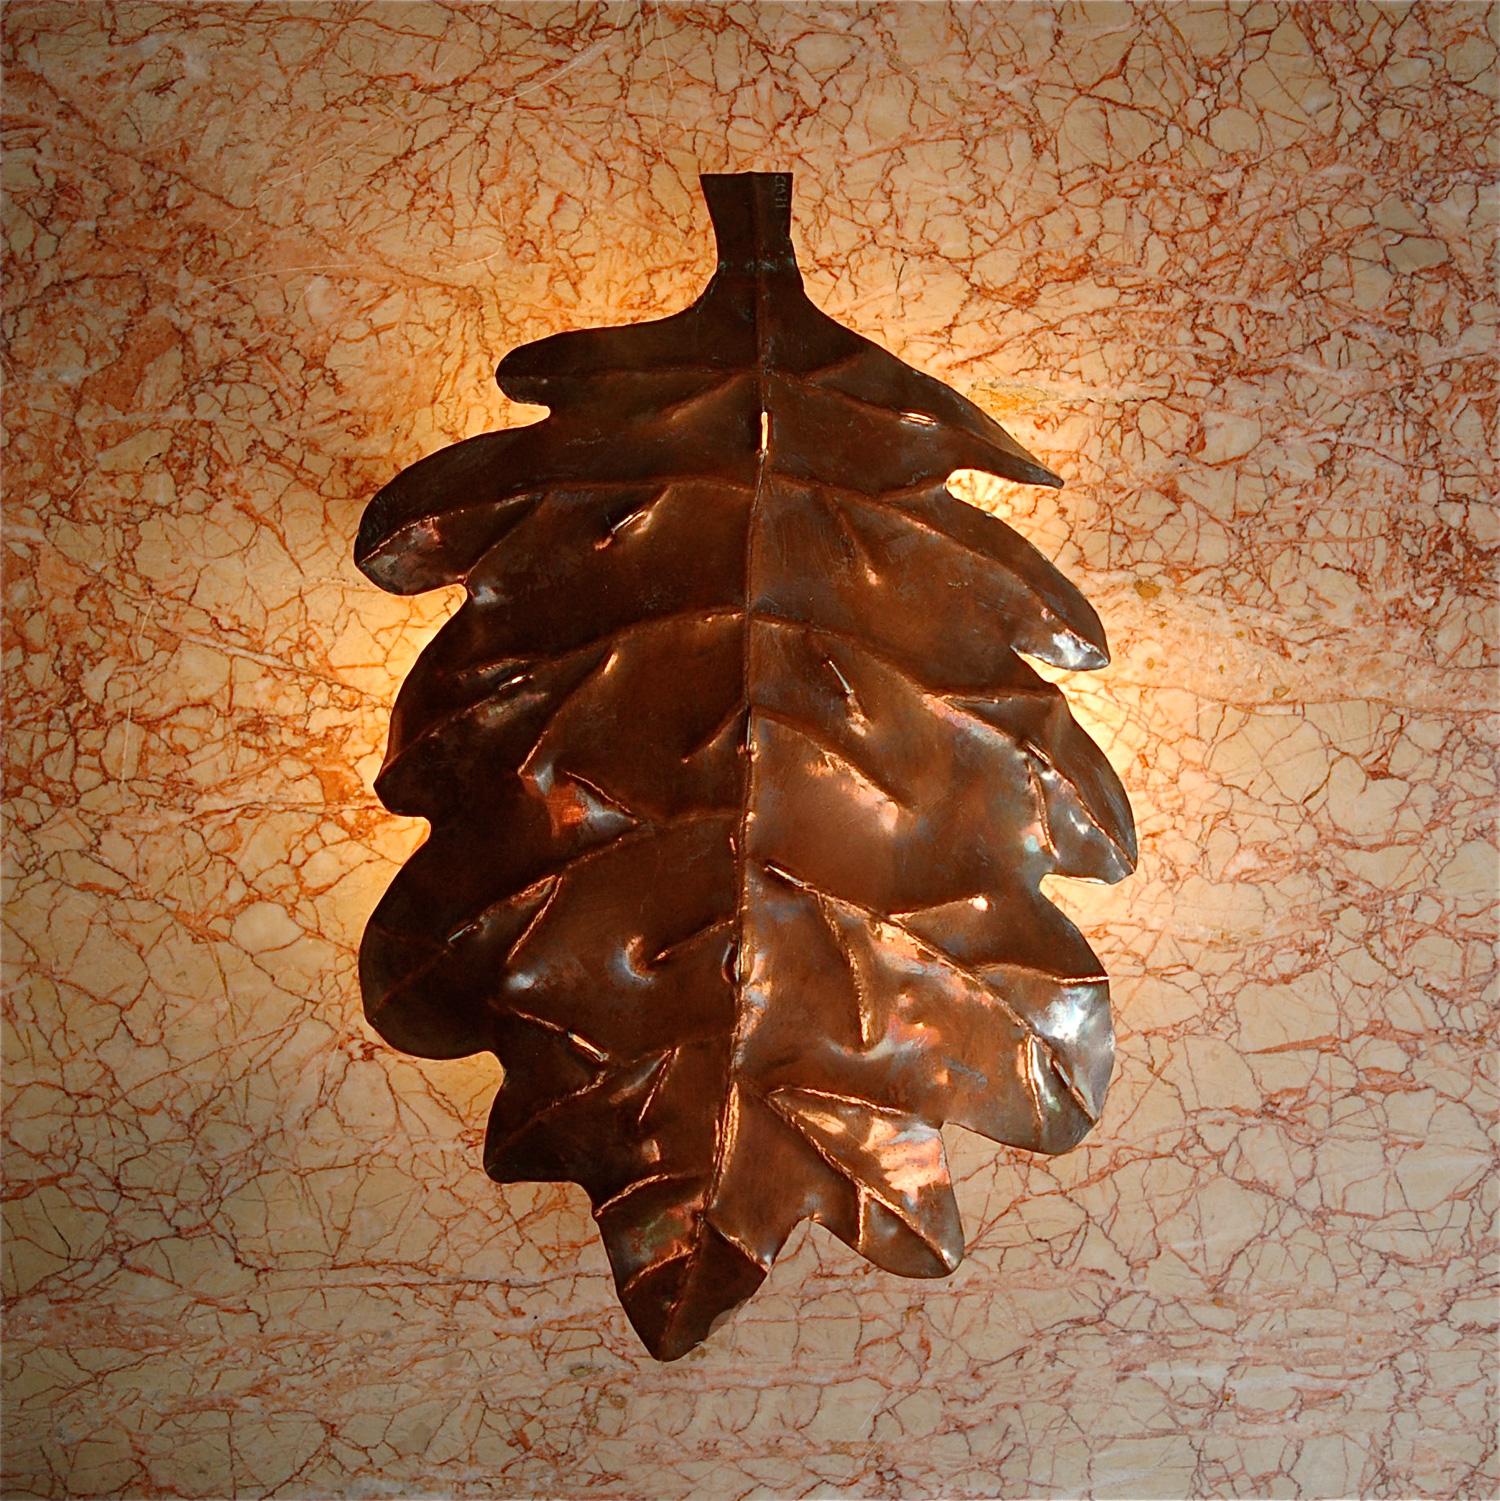 Hand-Crafted Handcrafted Copper Wall Light in Shape of Leaf, 1970s, Germany For Sale